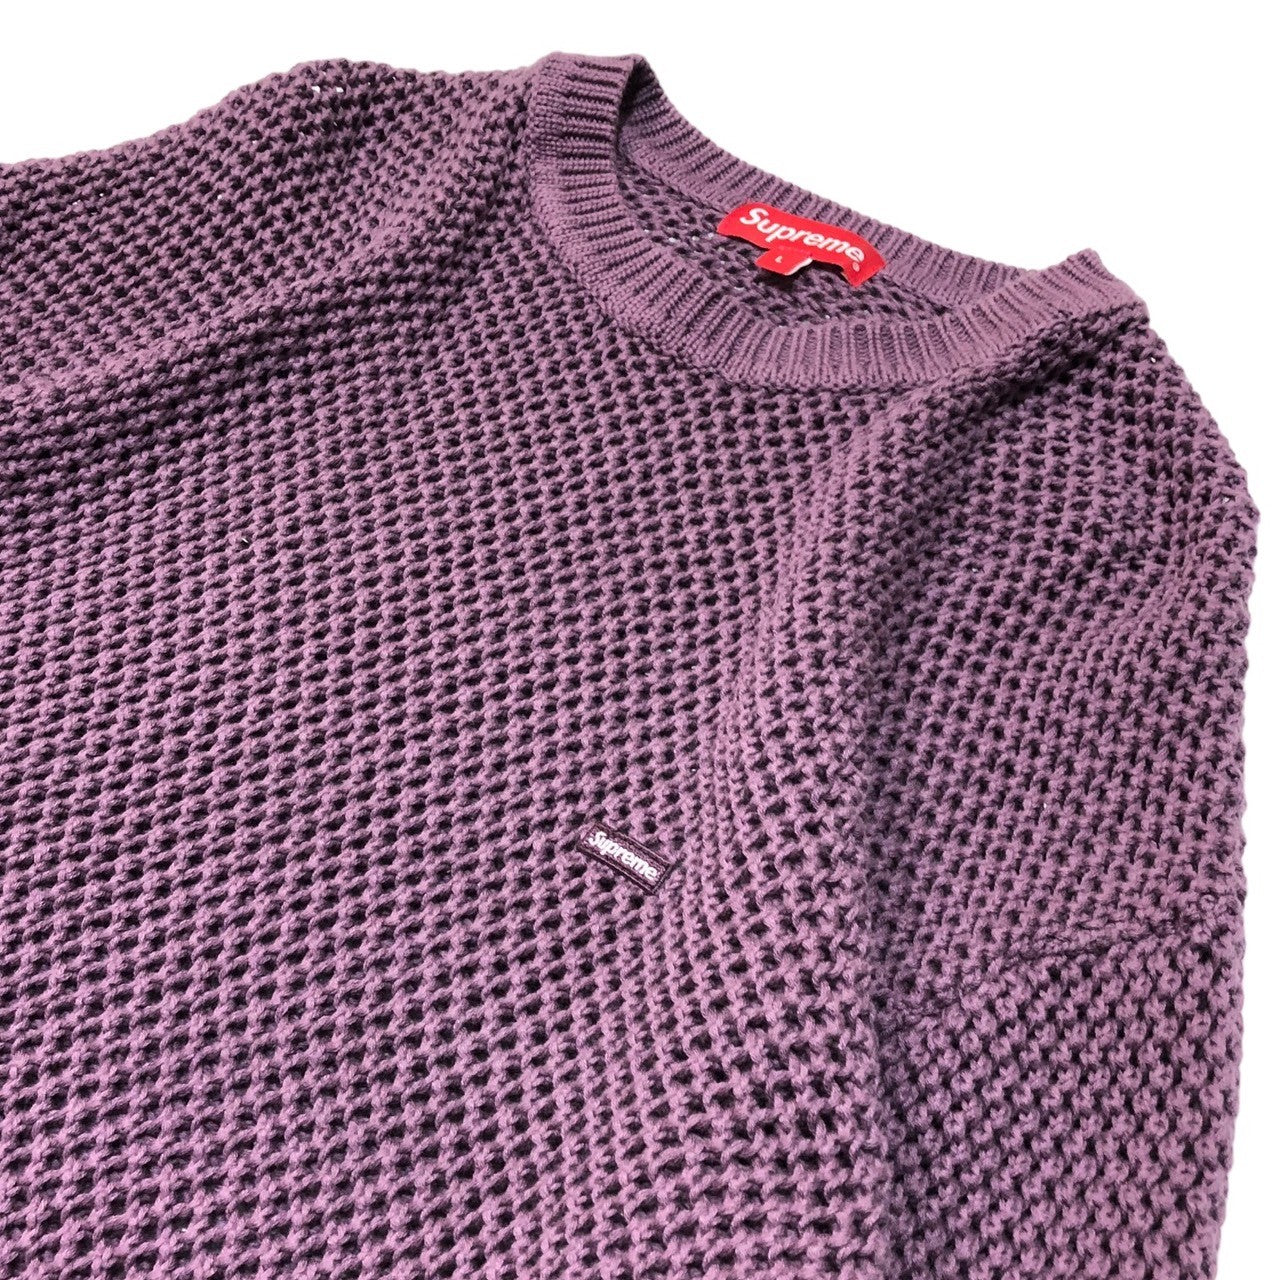 22SS Open Knit Small Box Sweater使用回数はどの程度でしょうか